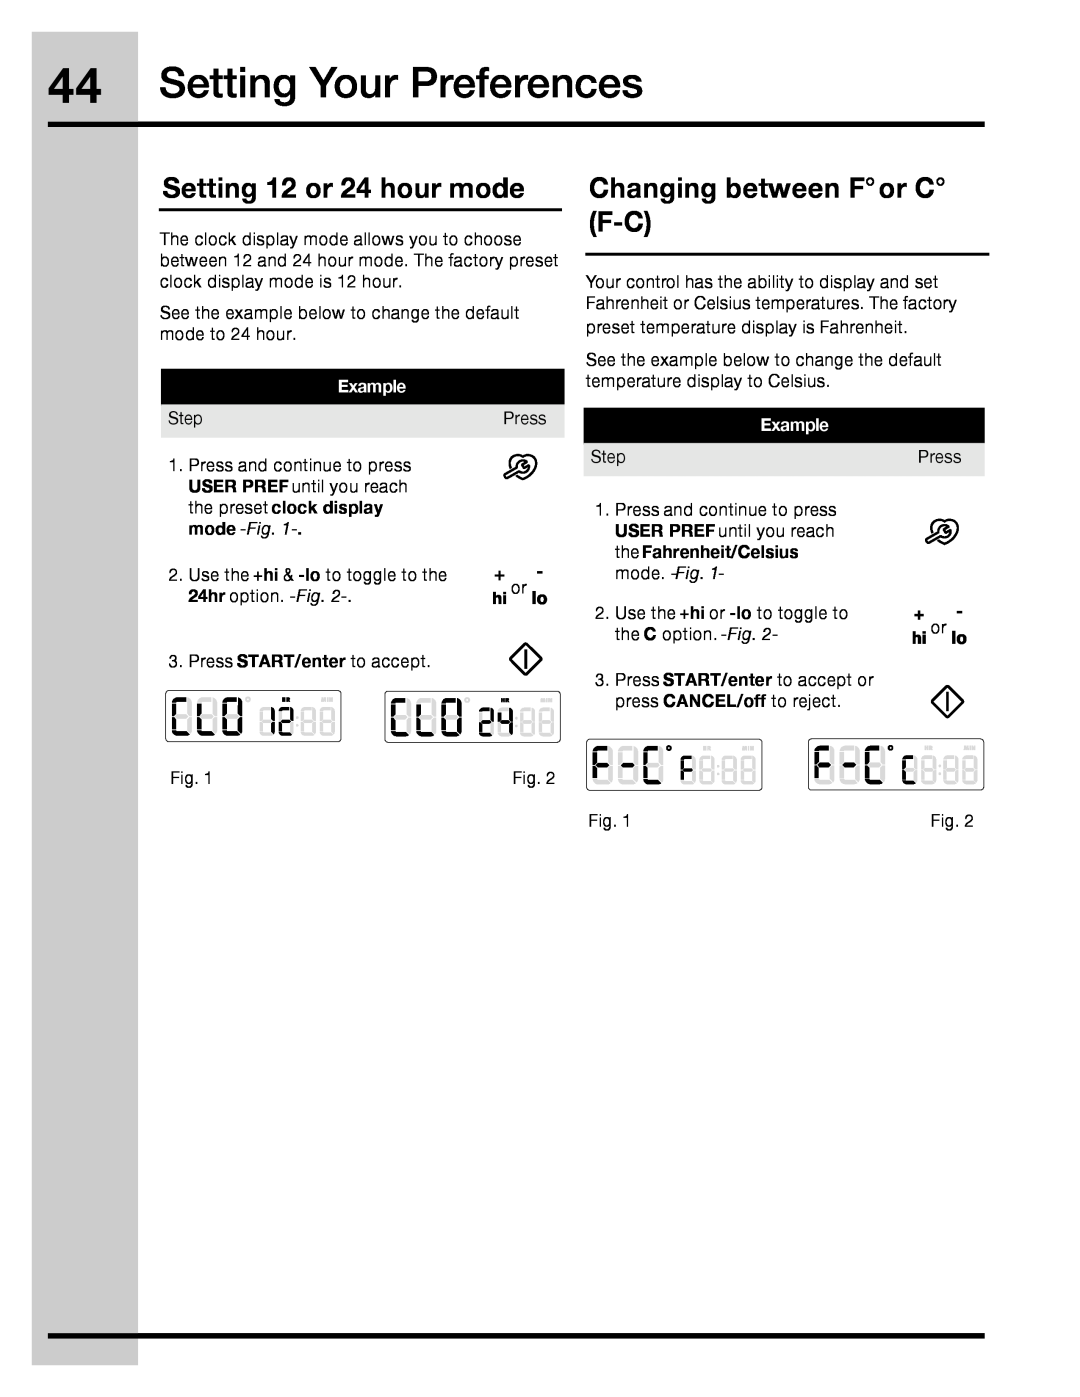 Electrolux 316471110 Setting Your Preferences, Setting 12 or 24 hour mode, Changing between For C F-C, 24hr option. -Fig 